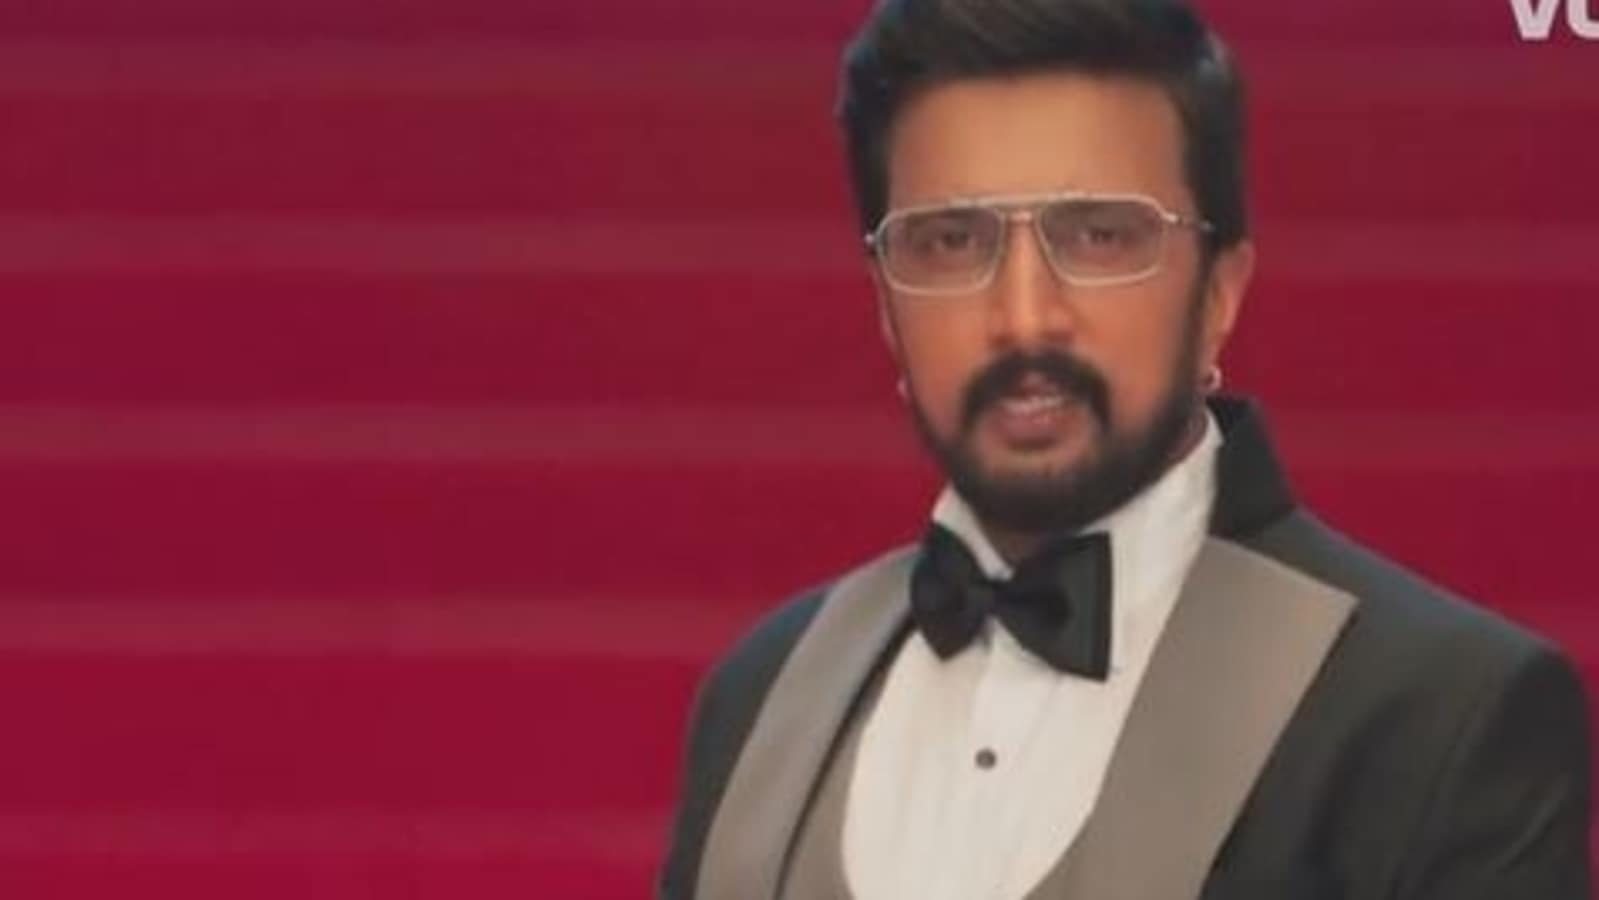 Bigg Boss OTT Kannada promo: Kiccha Sudeep corrects ‘confused’ fans cheering for the wrong show. Watch